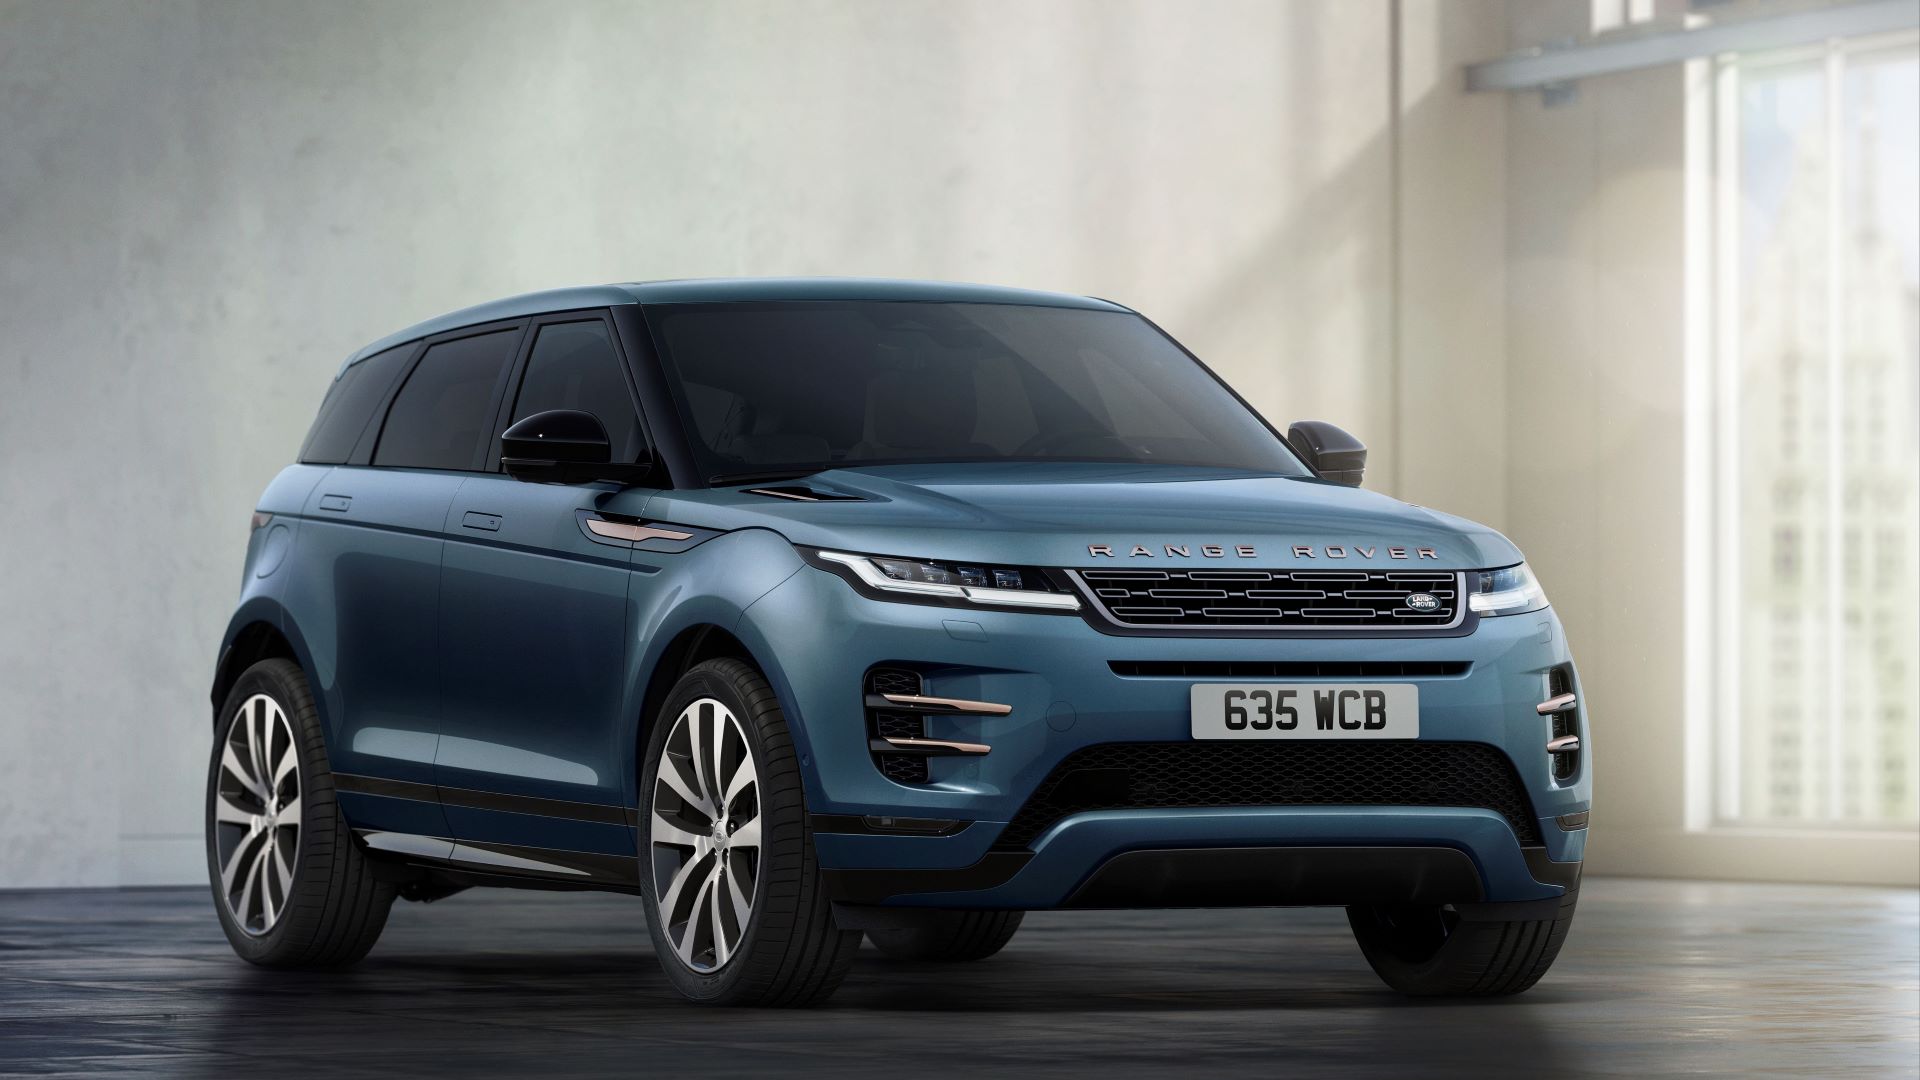 New Range Rover Evoque and Range Rover Velar now available to order in South Africa